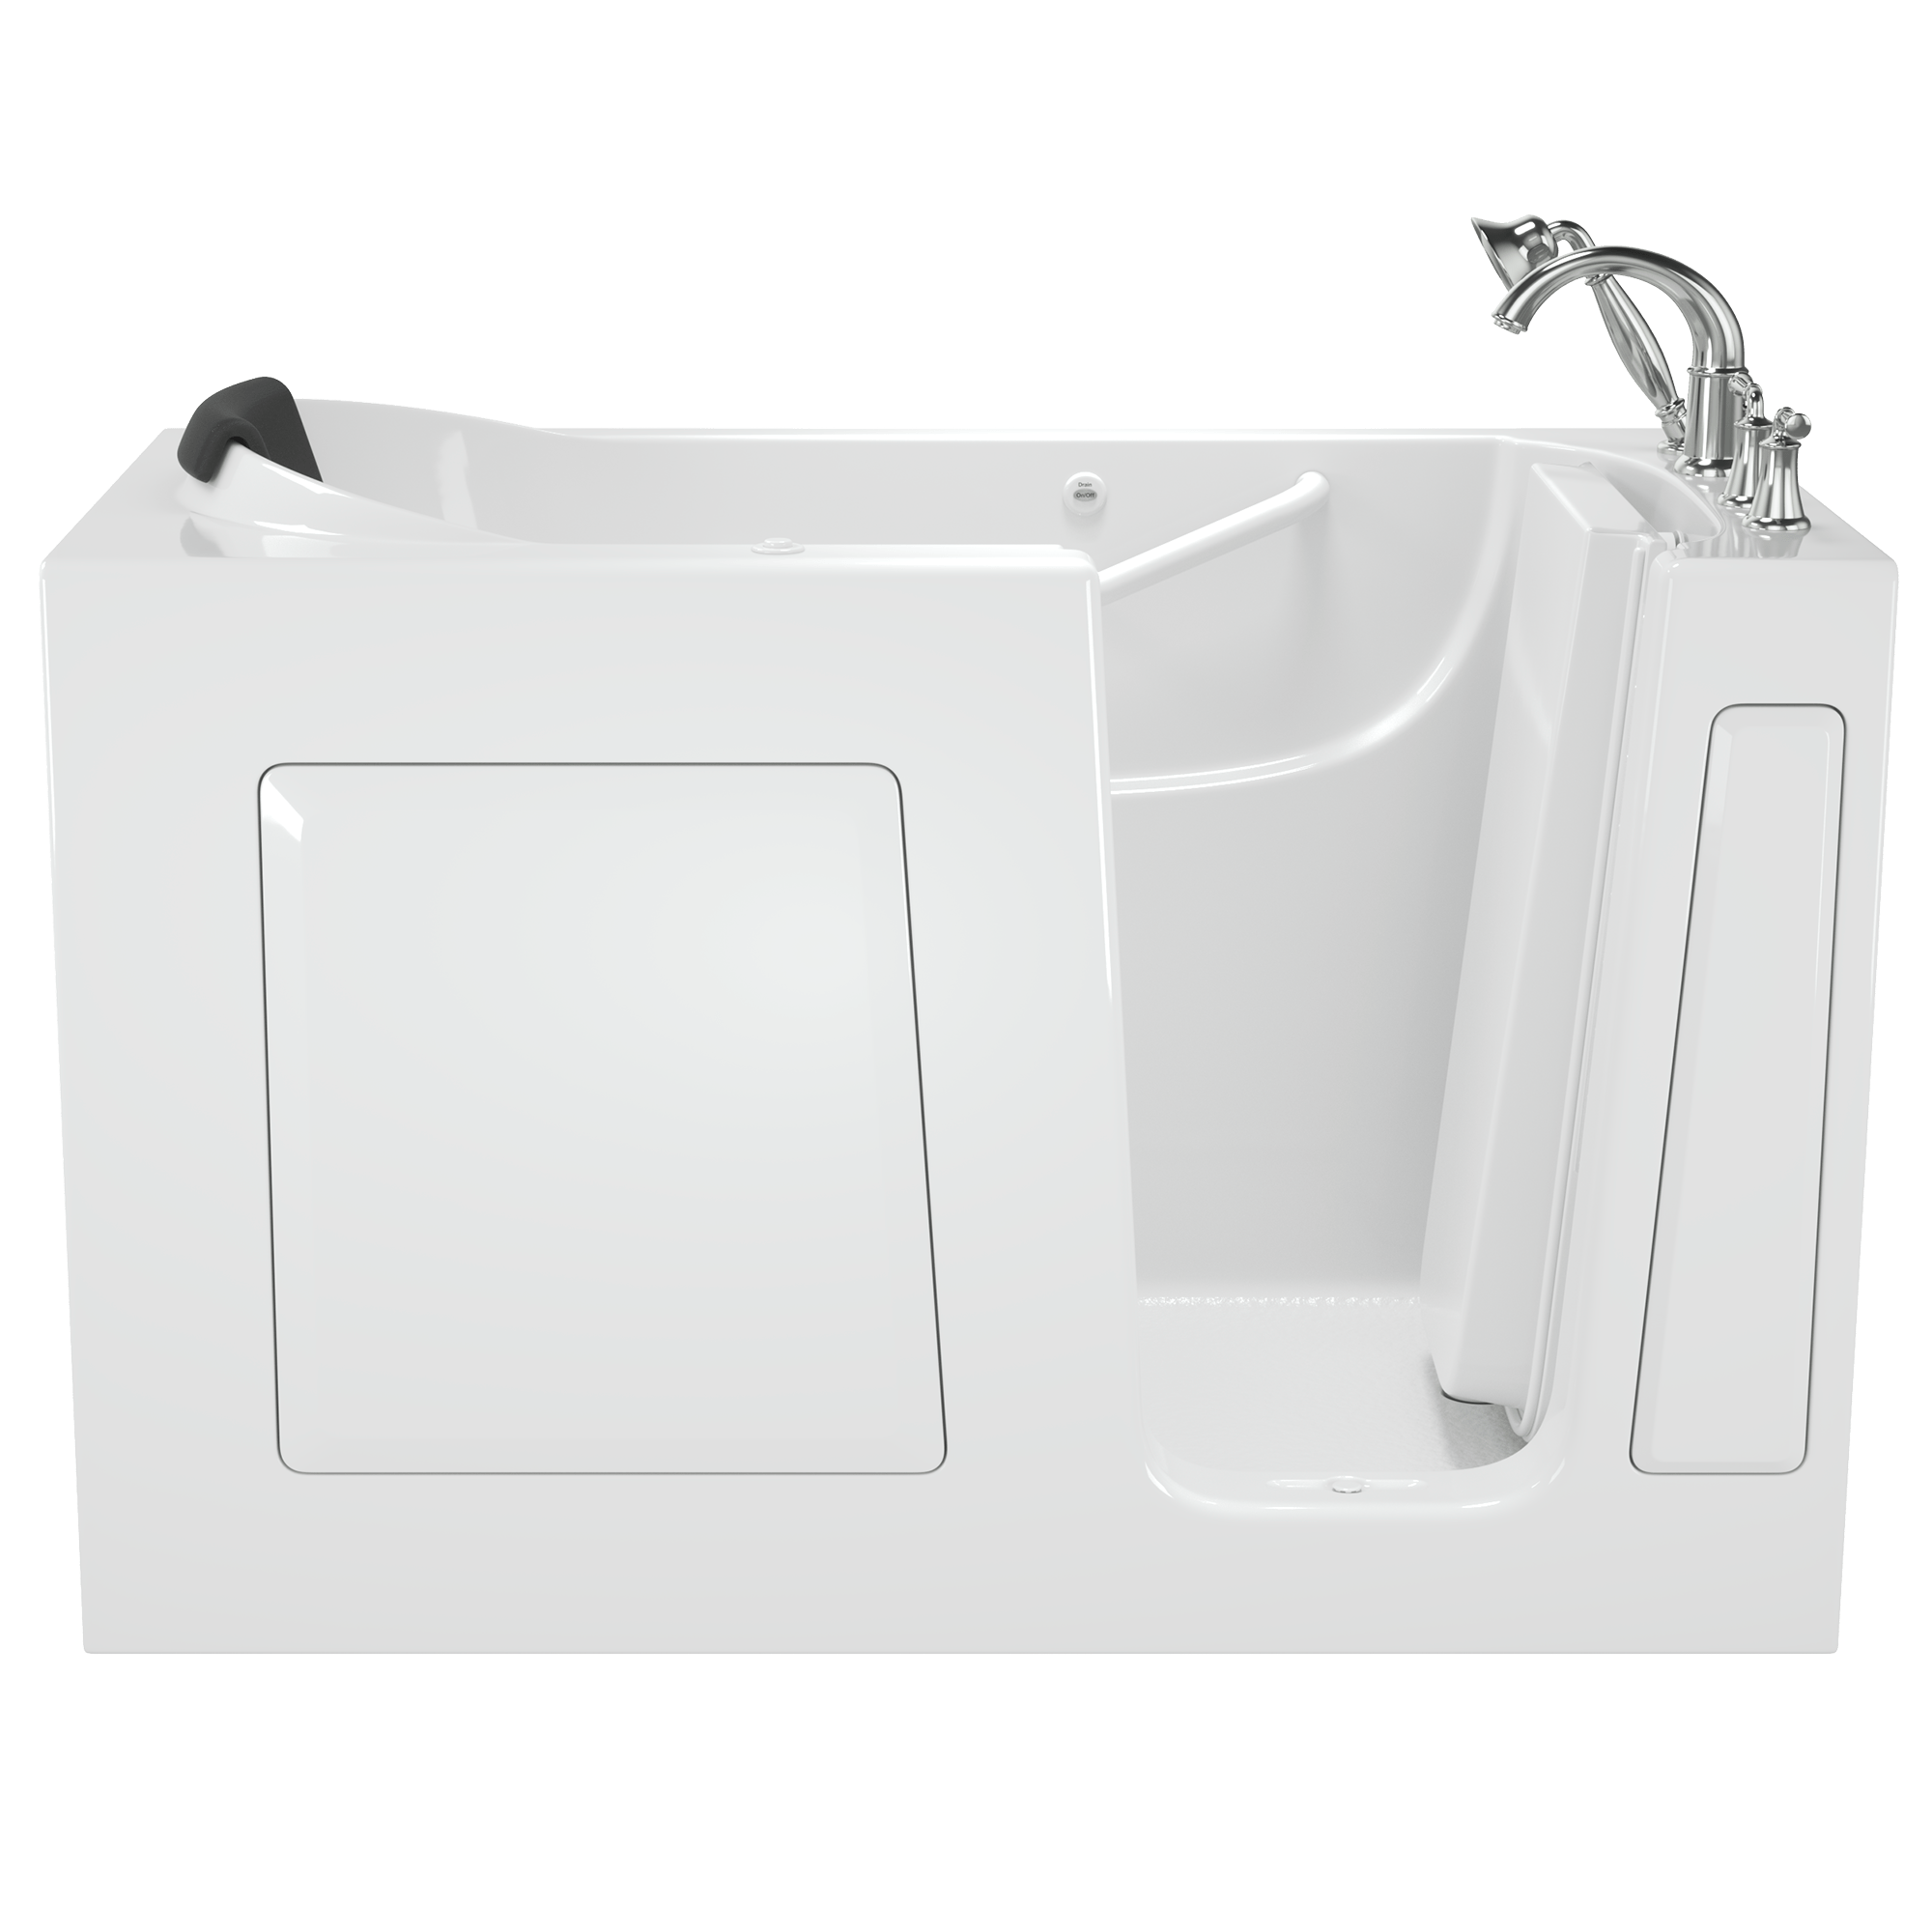 Gelcoat Premium Series 60x30 Inch Walk-In Bathtub with Air Massage System - Right Hand Door and Drain